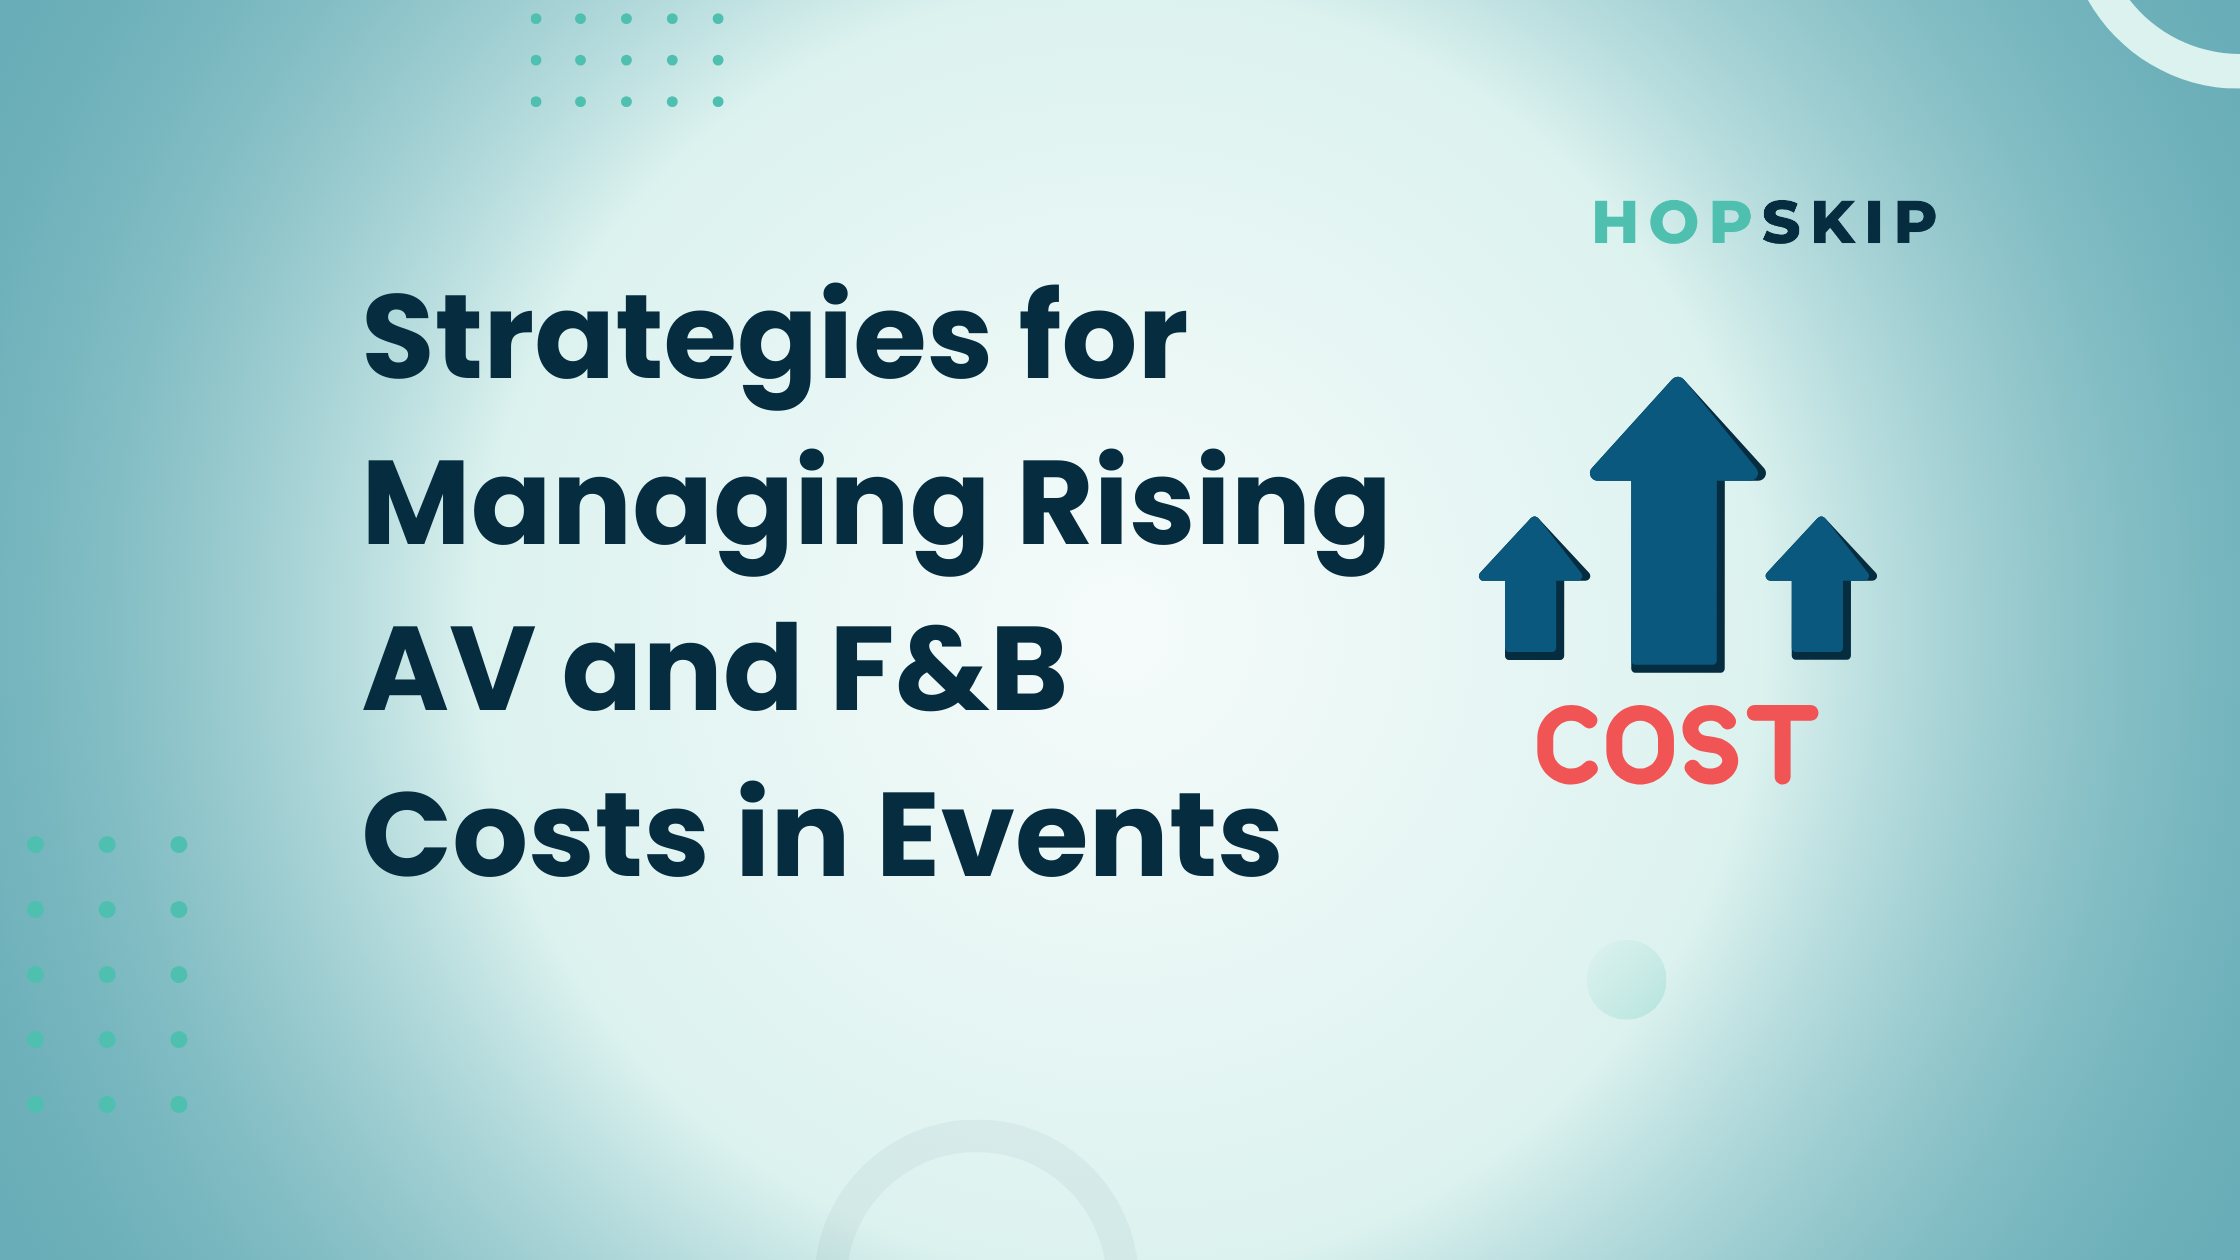 Strategies for Managing Rising AV and F&B Costs in Events